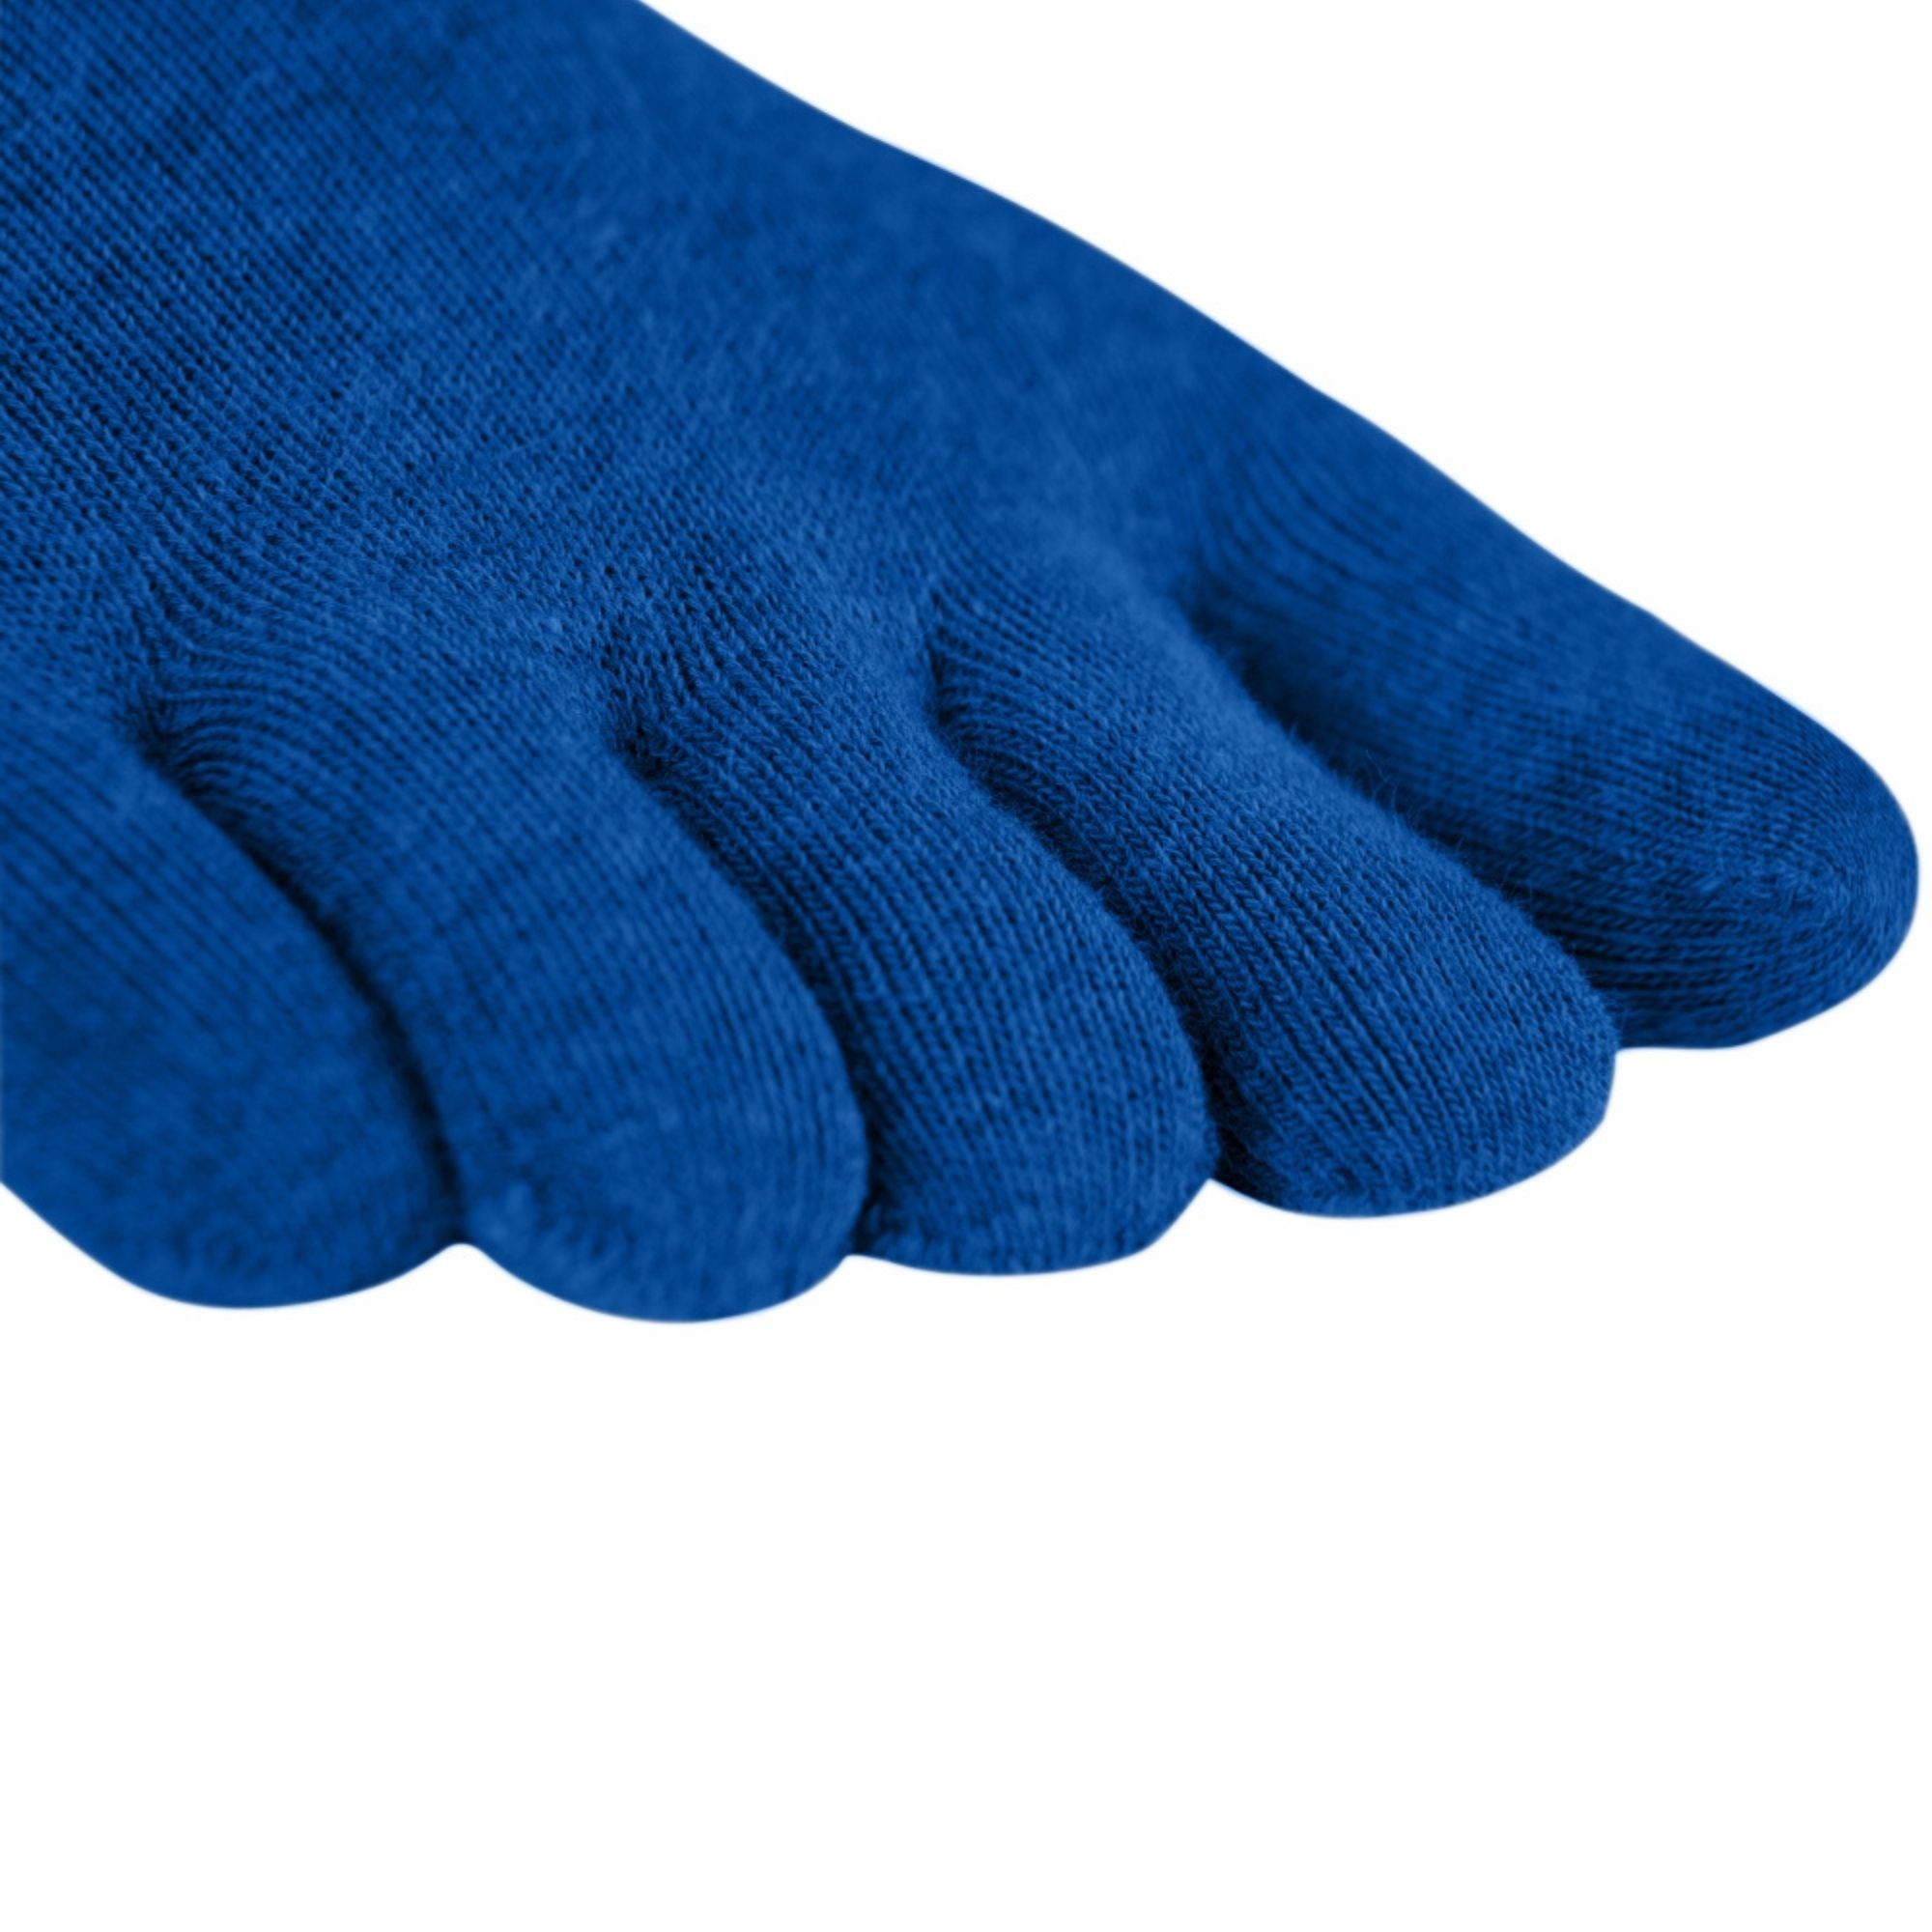 3-pack sports toe socks from Coolmax and cotton from Knitido in mandarin blue